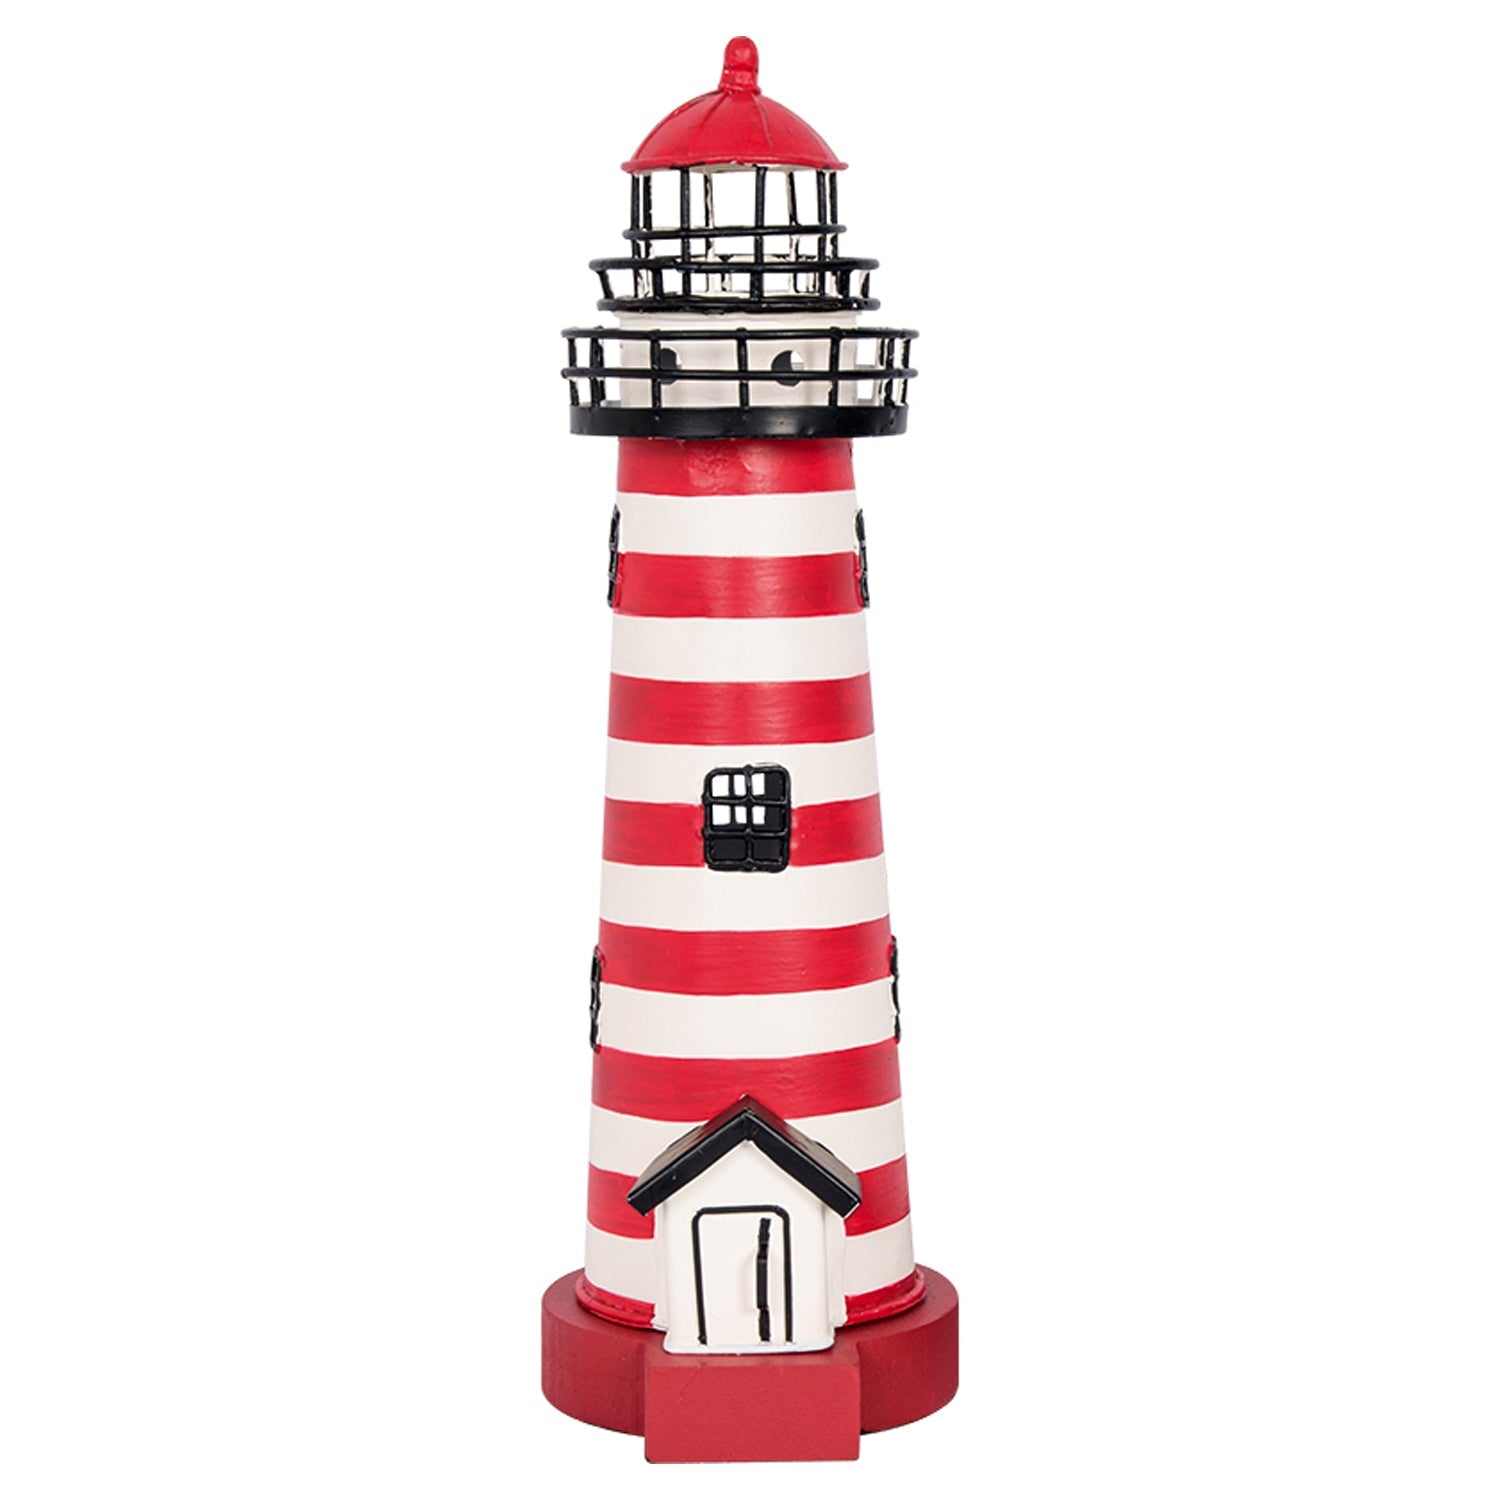 RED STRIPED LIGHTHOUSE LAMP